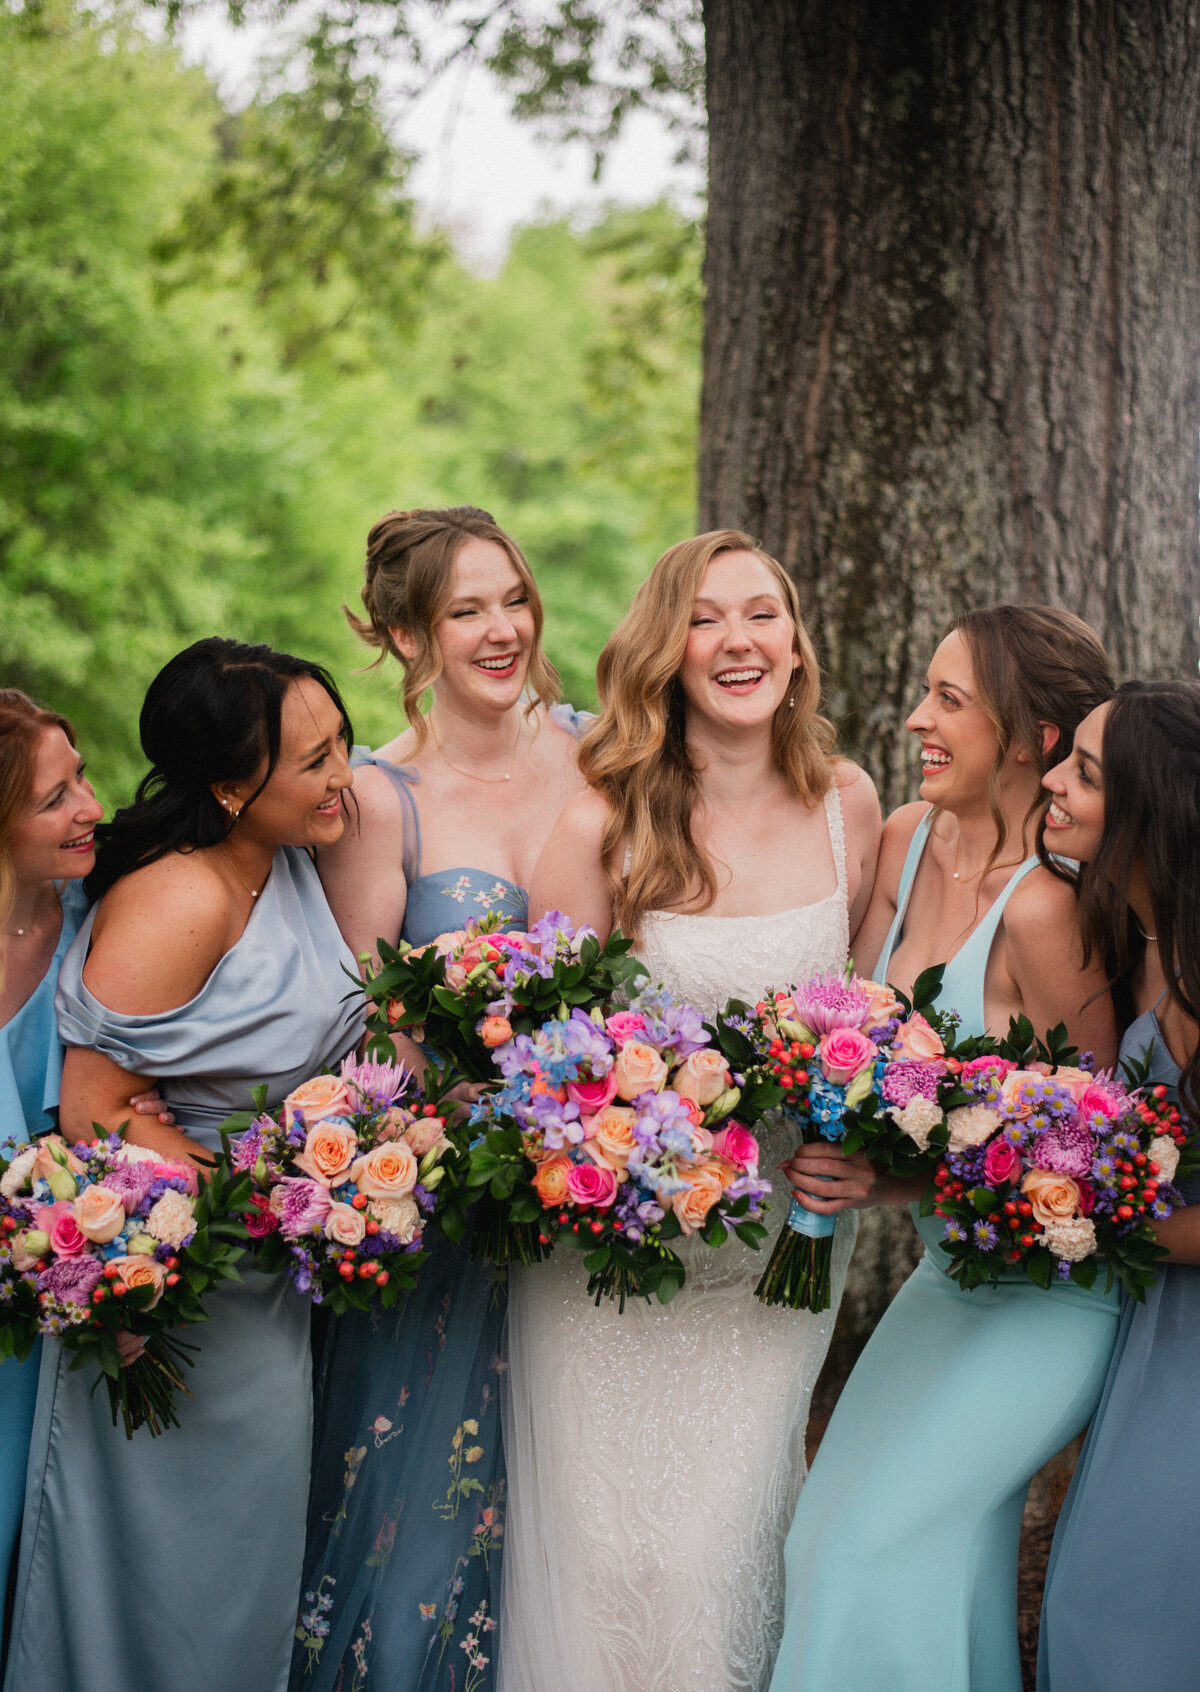 Five bridesmaids wearing dresses of different shades of blue surround a bride wearing a white dress standing in front of a tree